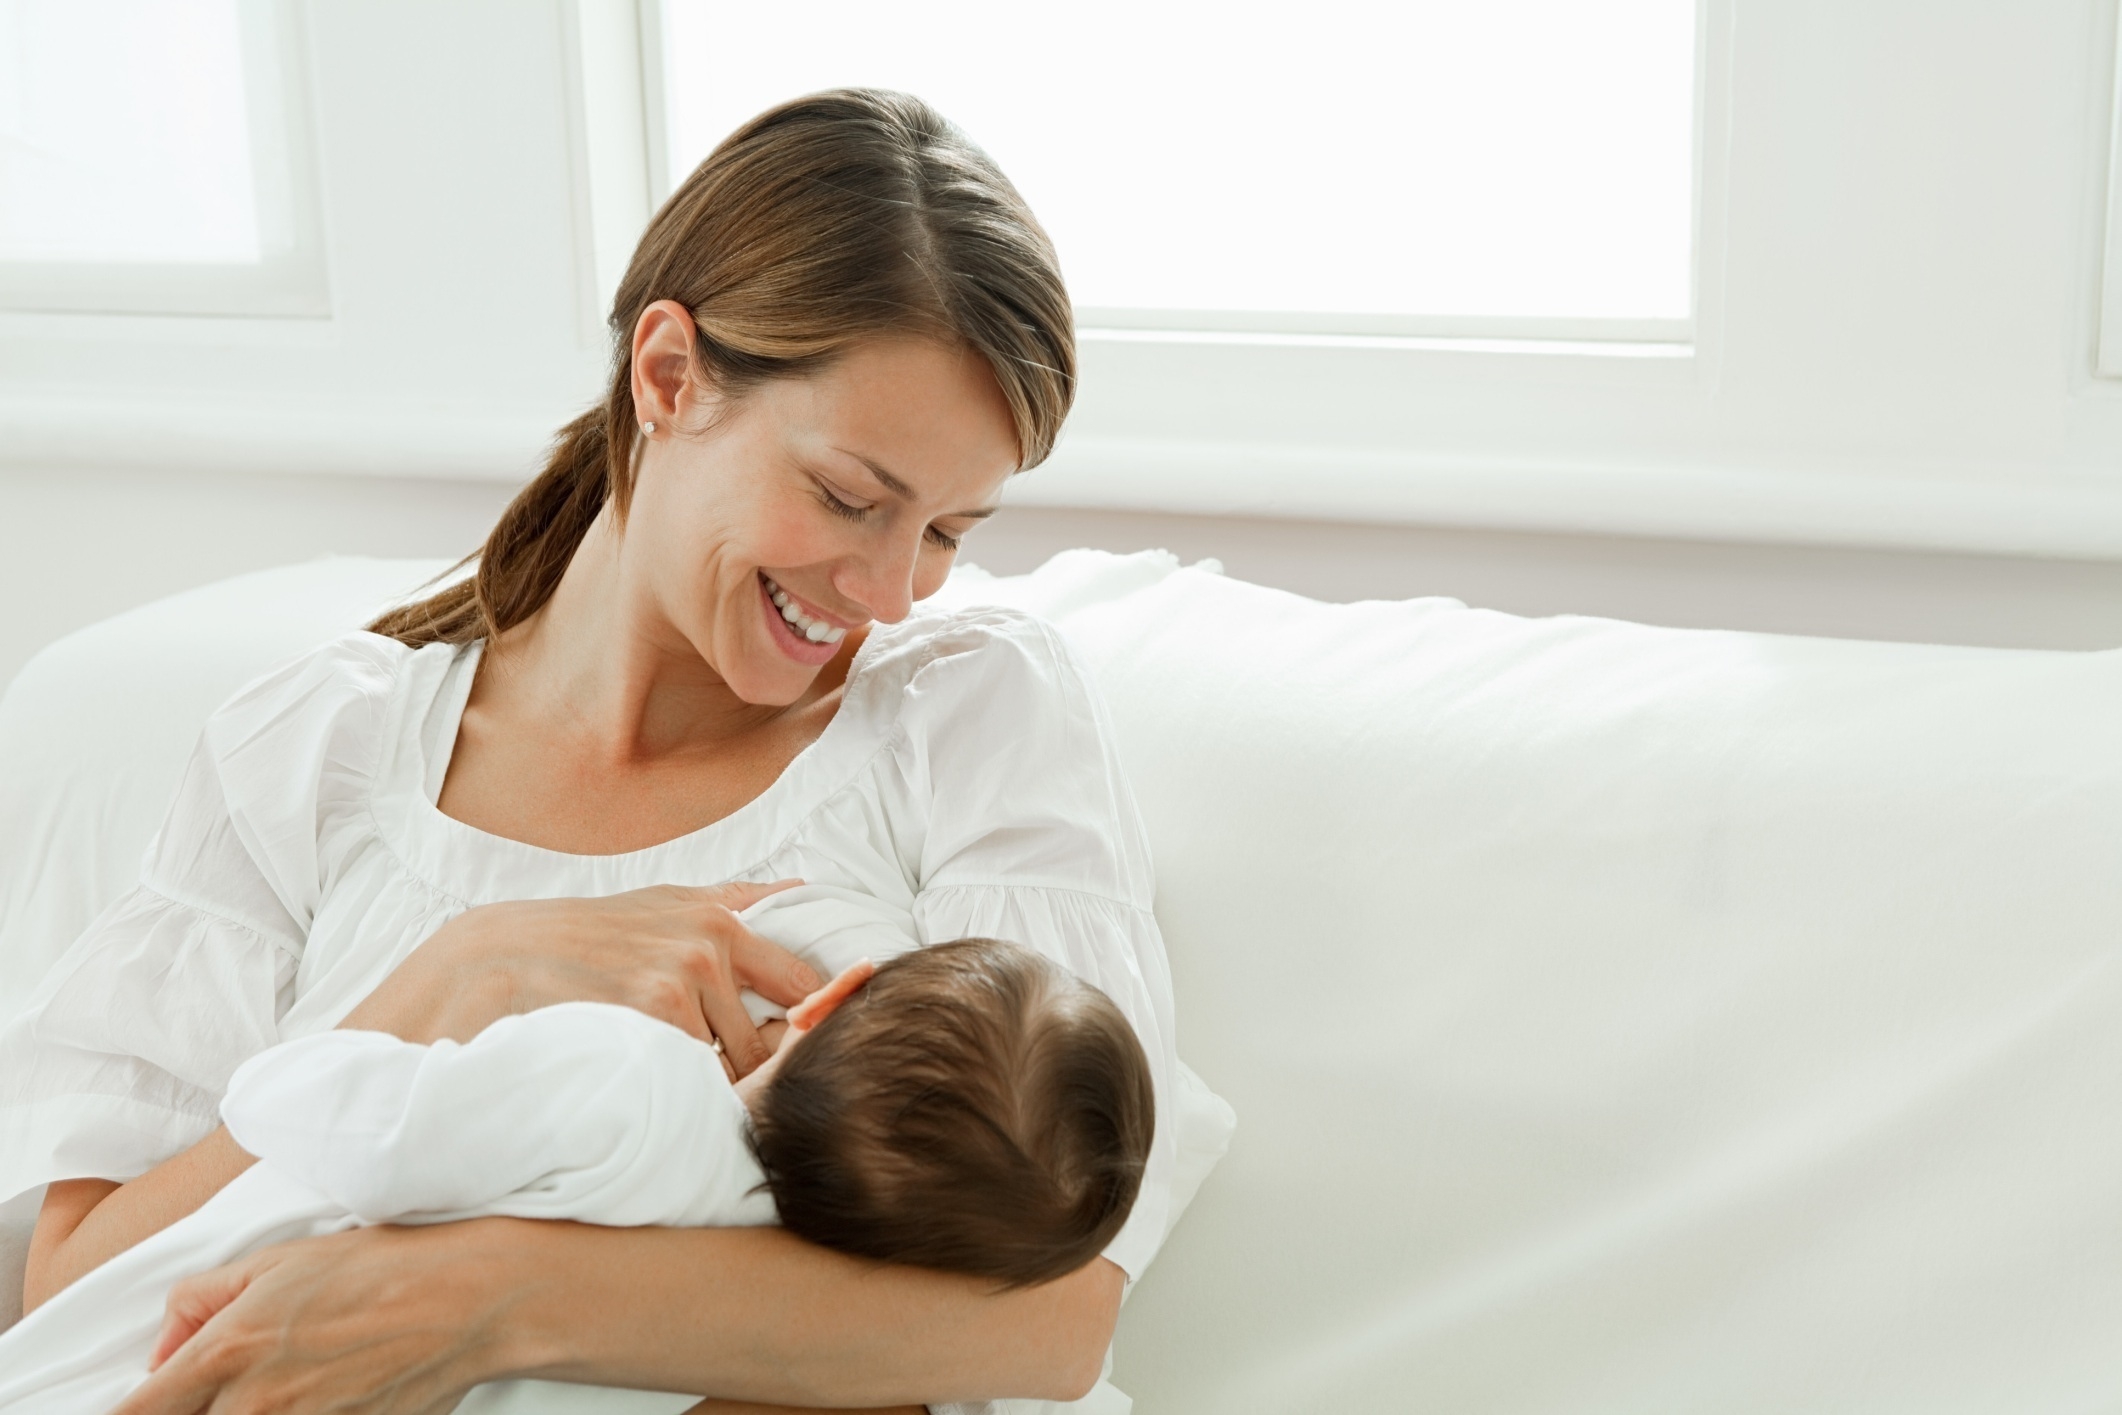 Image: Exclusive breastfeeding reduces your baby’s risk of eczema later in life